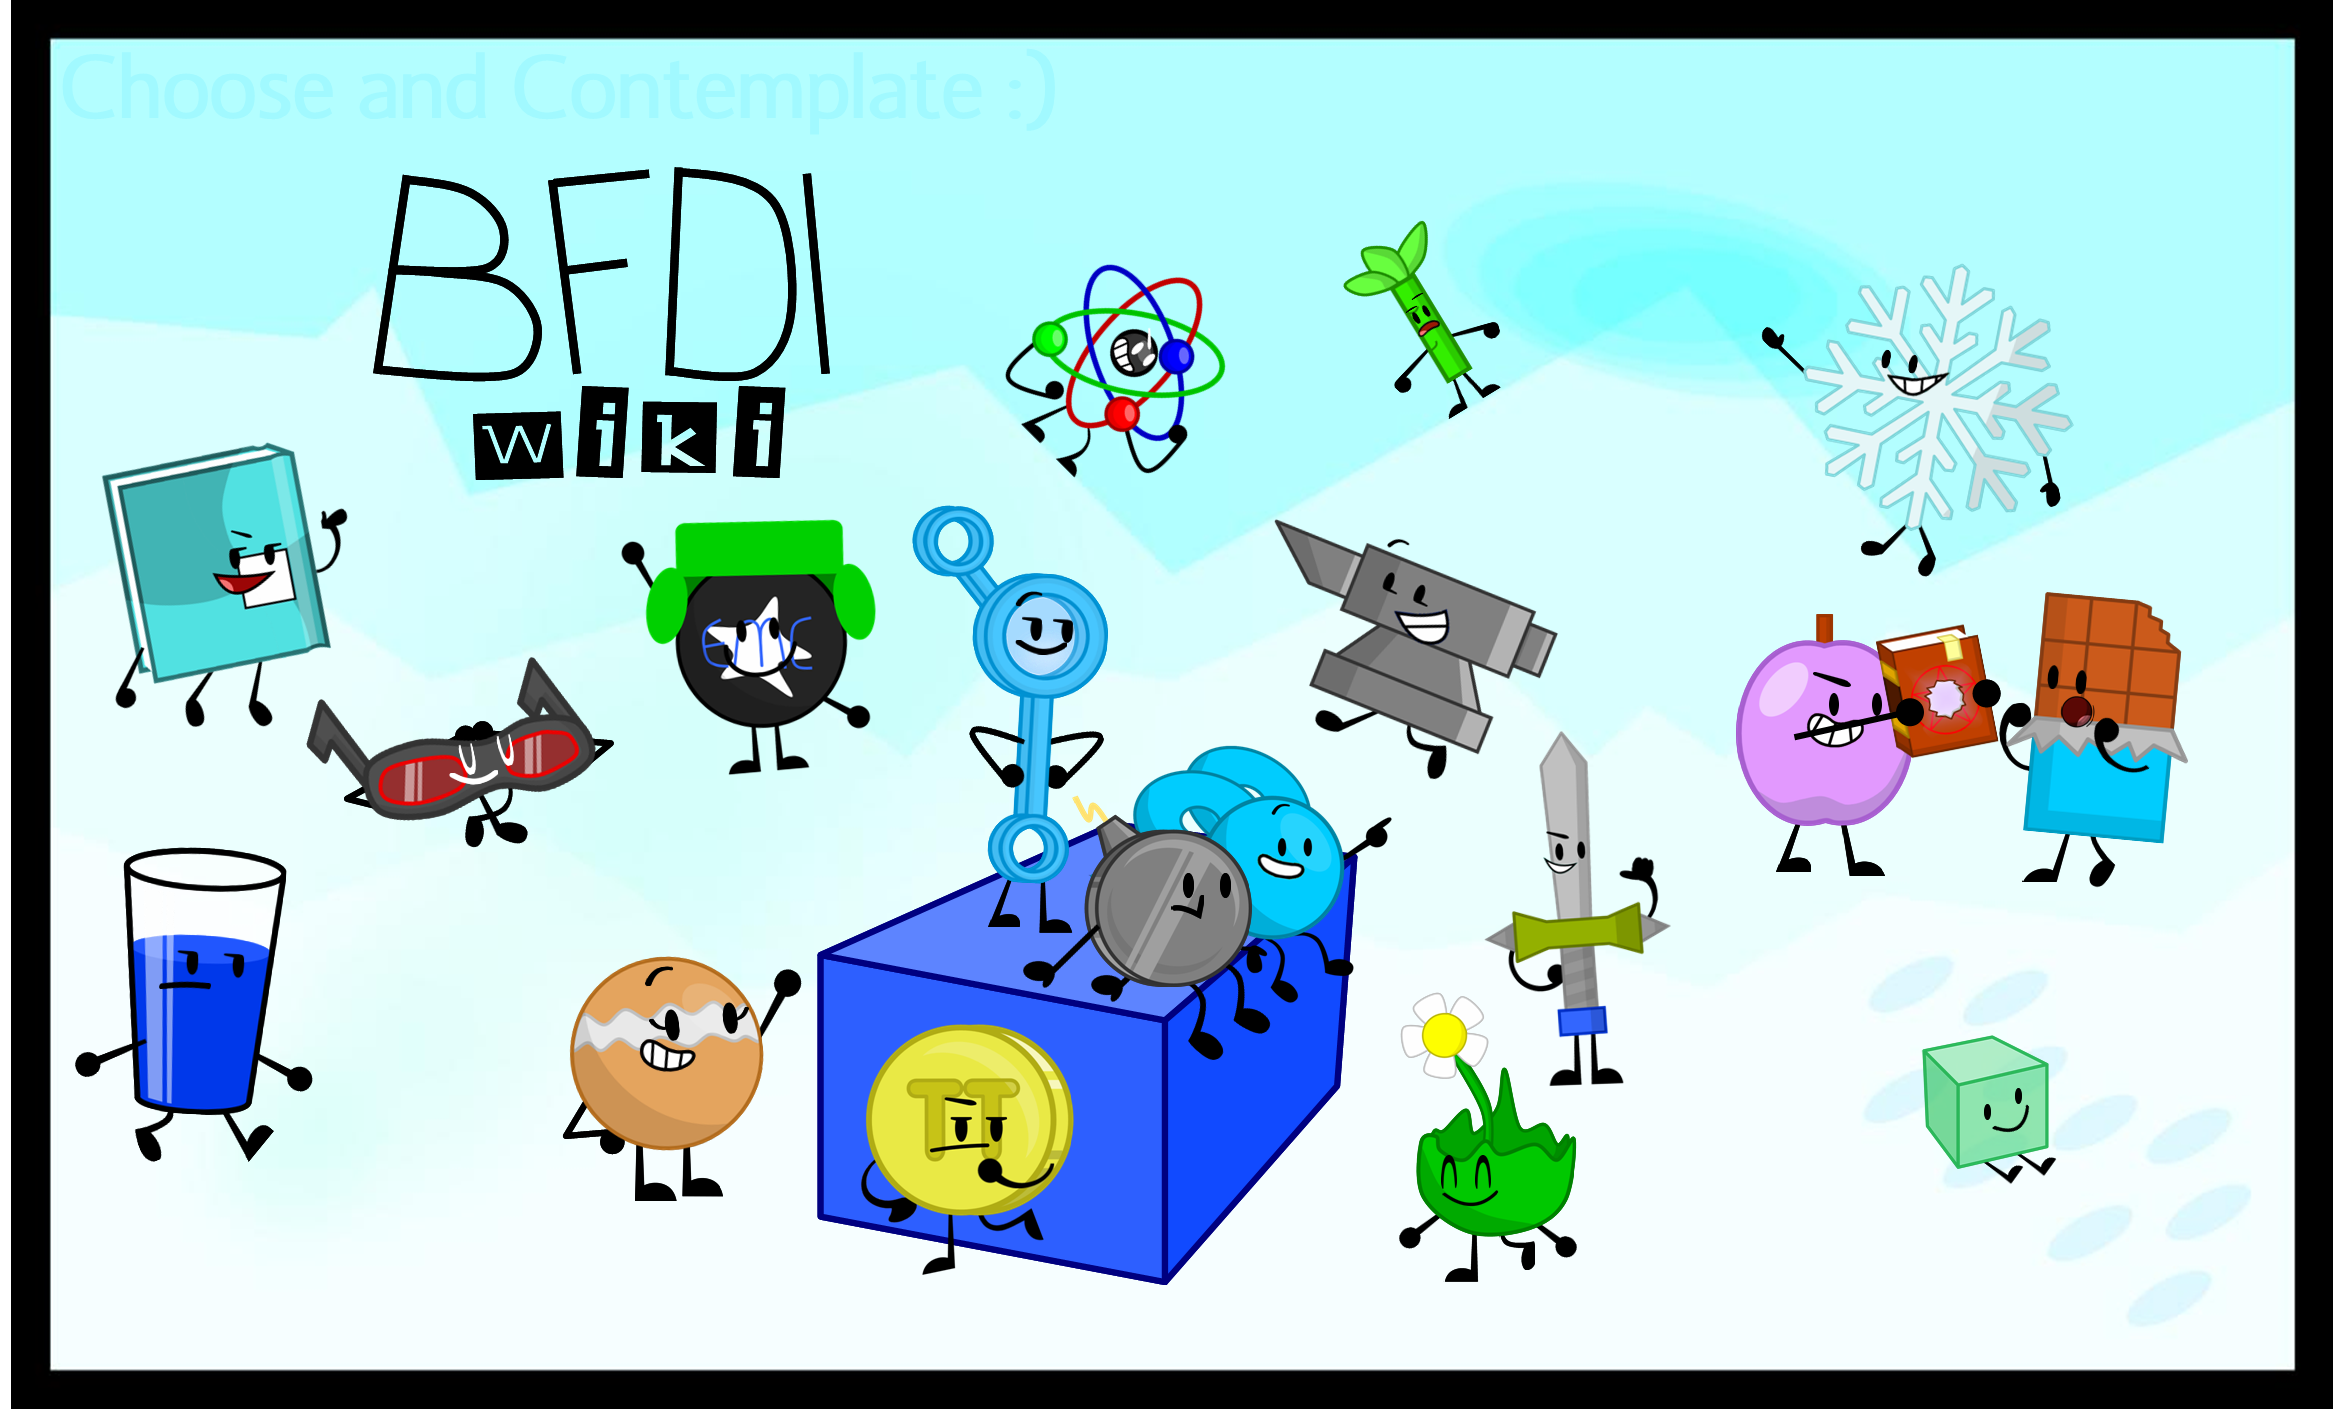 User blog:CerealBoxDude/basicly the bfdi page, Battle for Dream Island Wiki